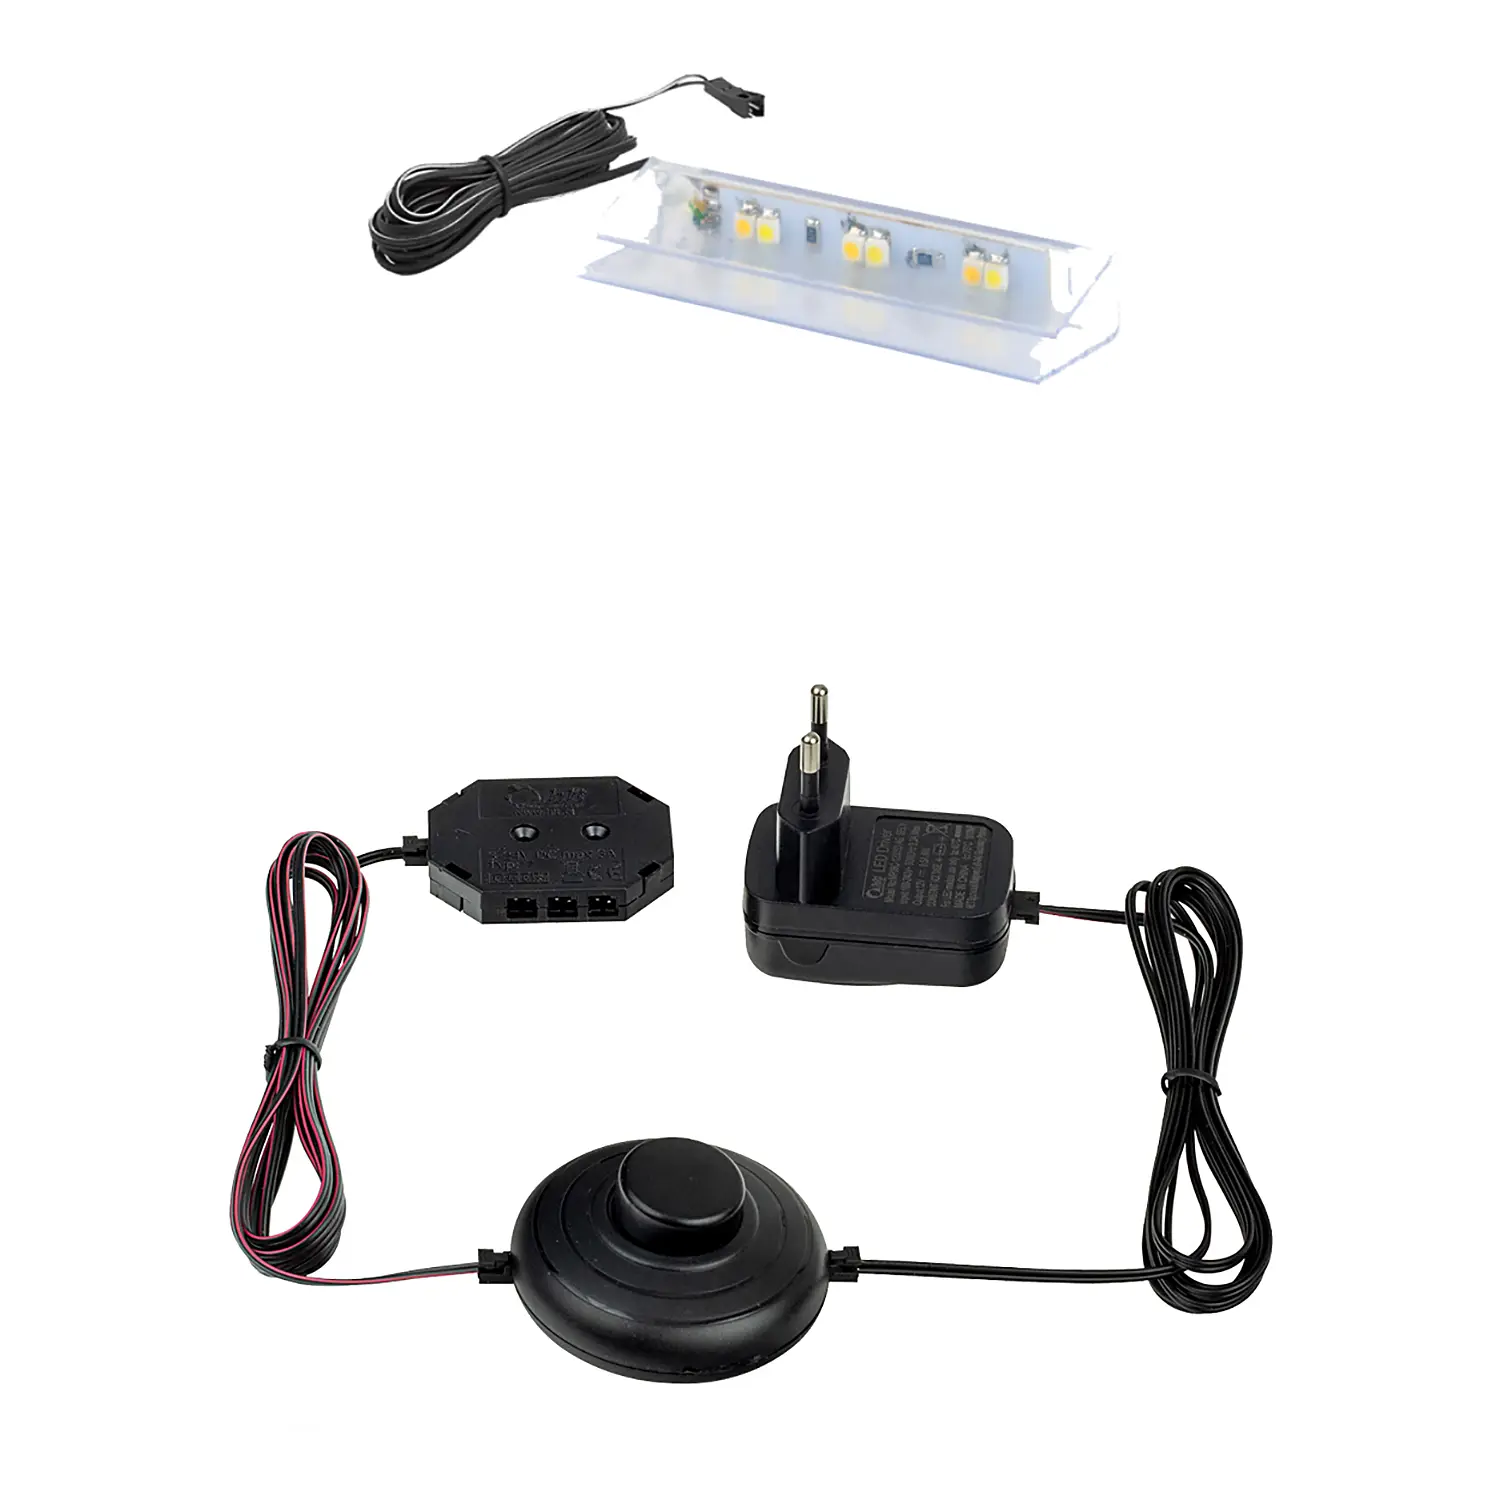 Solea LED Typ-C Beleuchtung